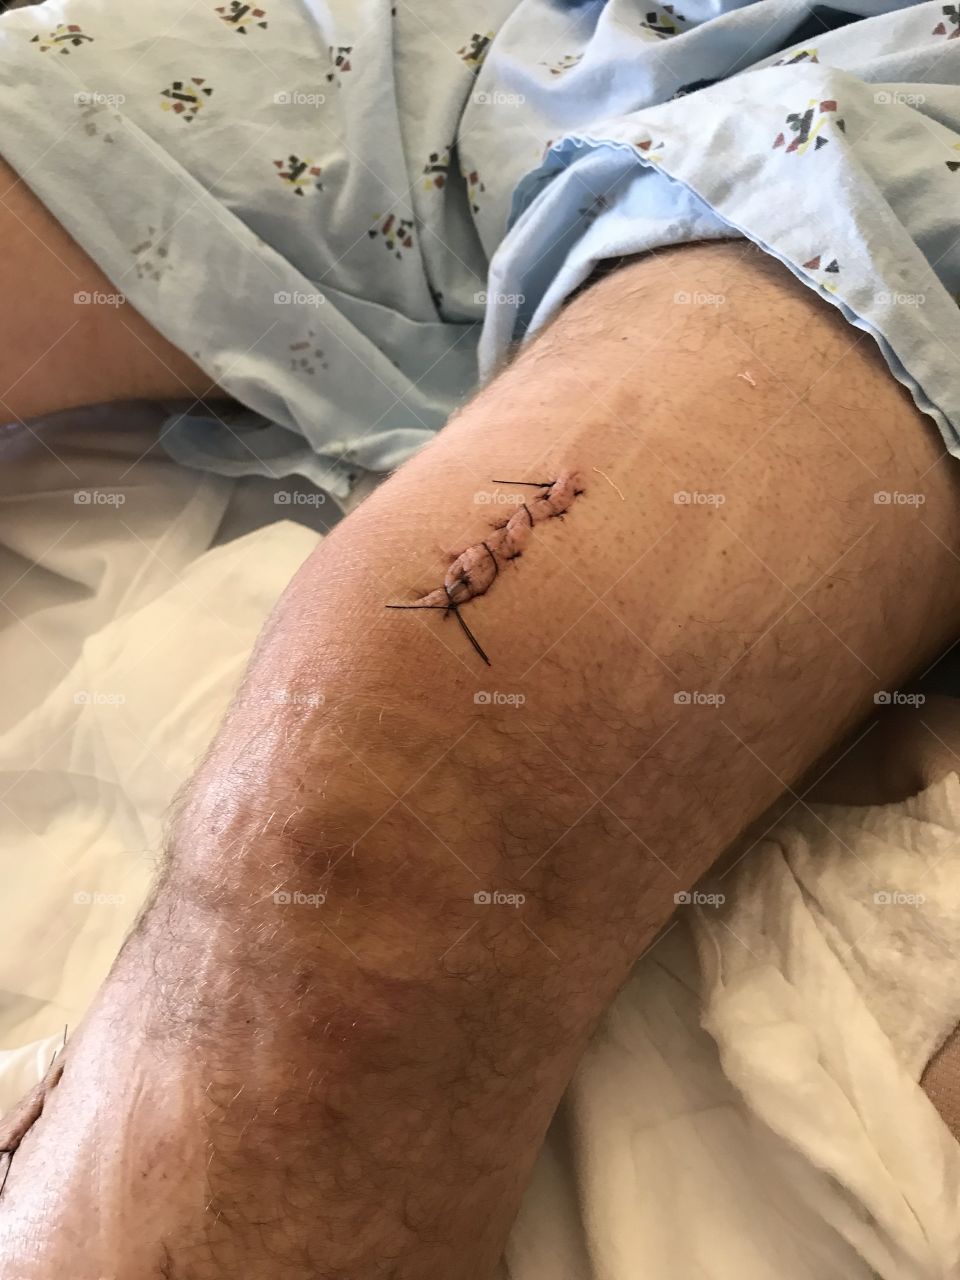 Stitches from rod placement surgery above knee